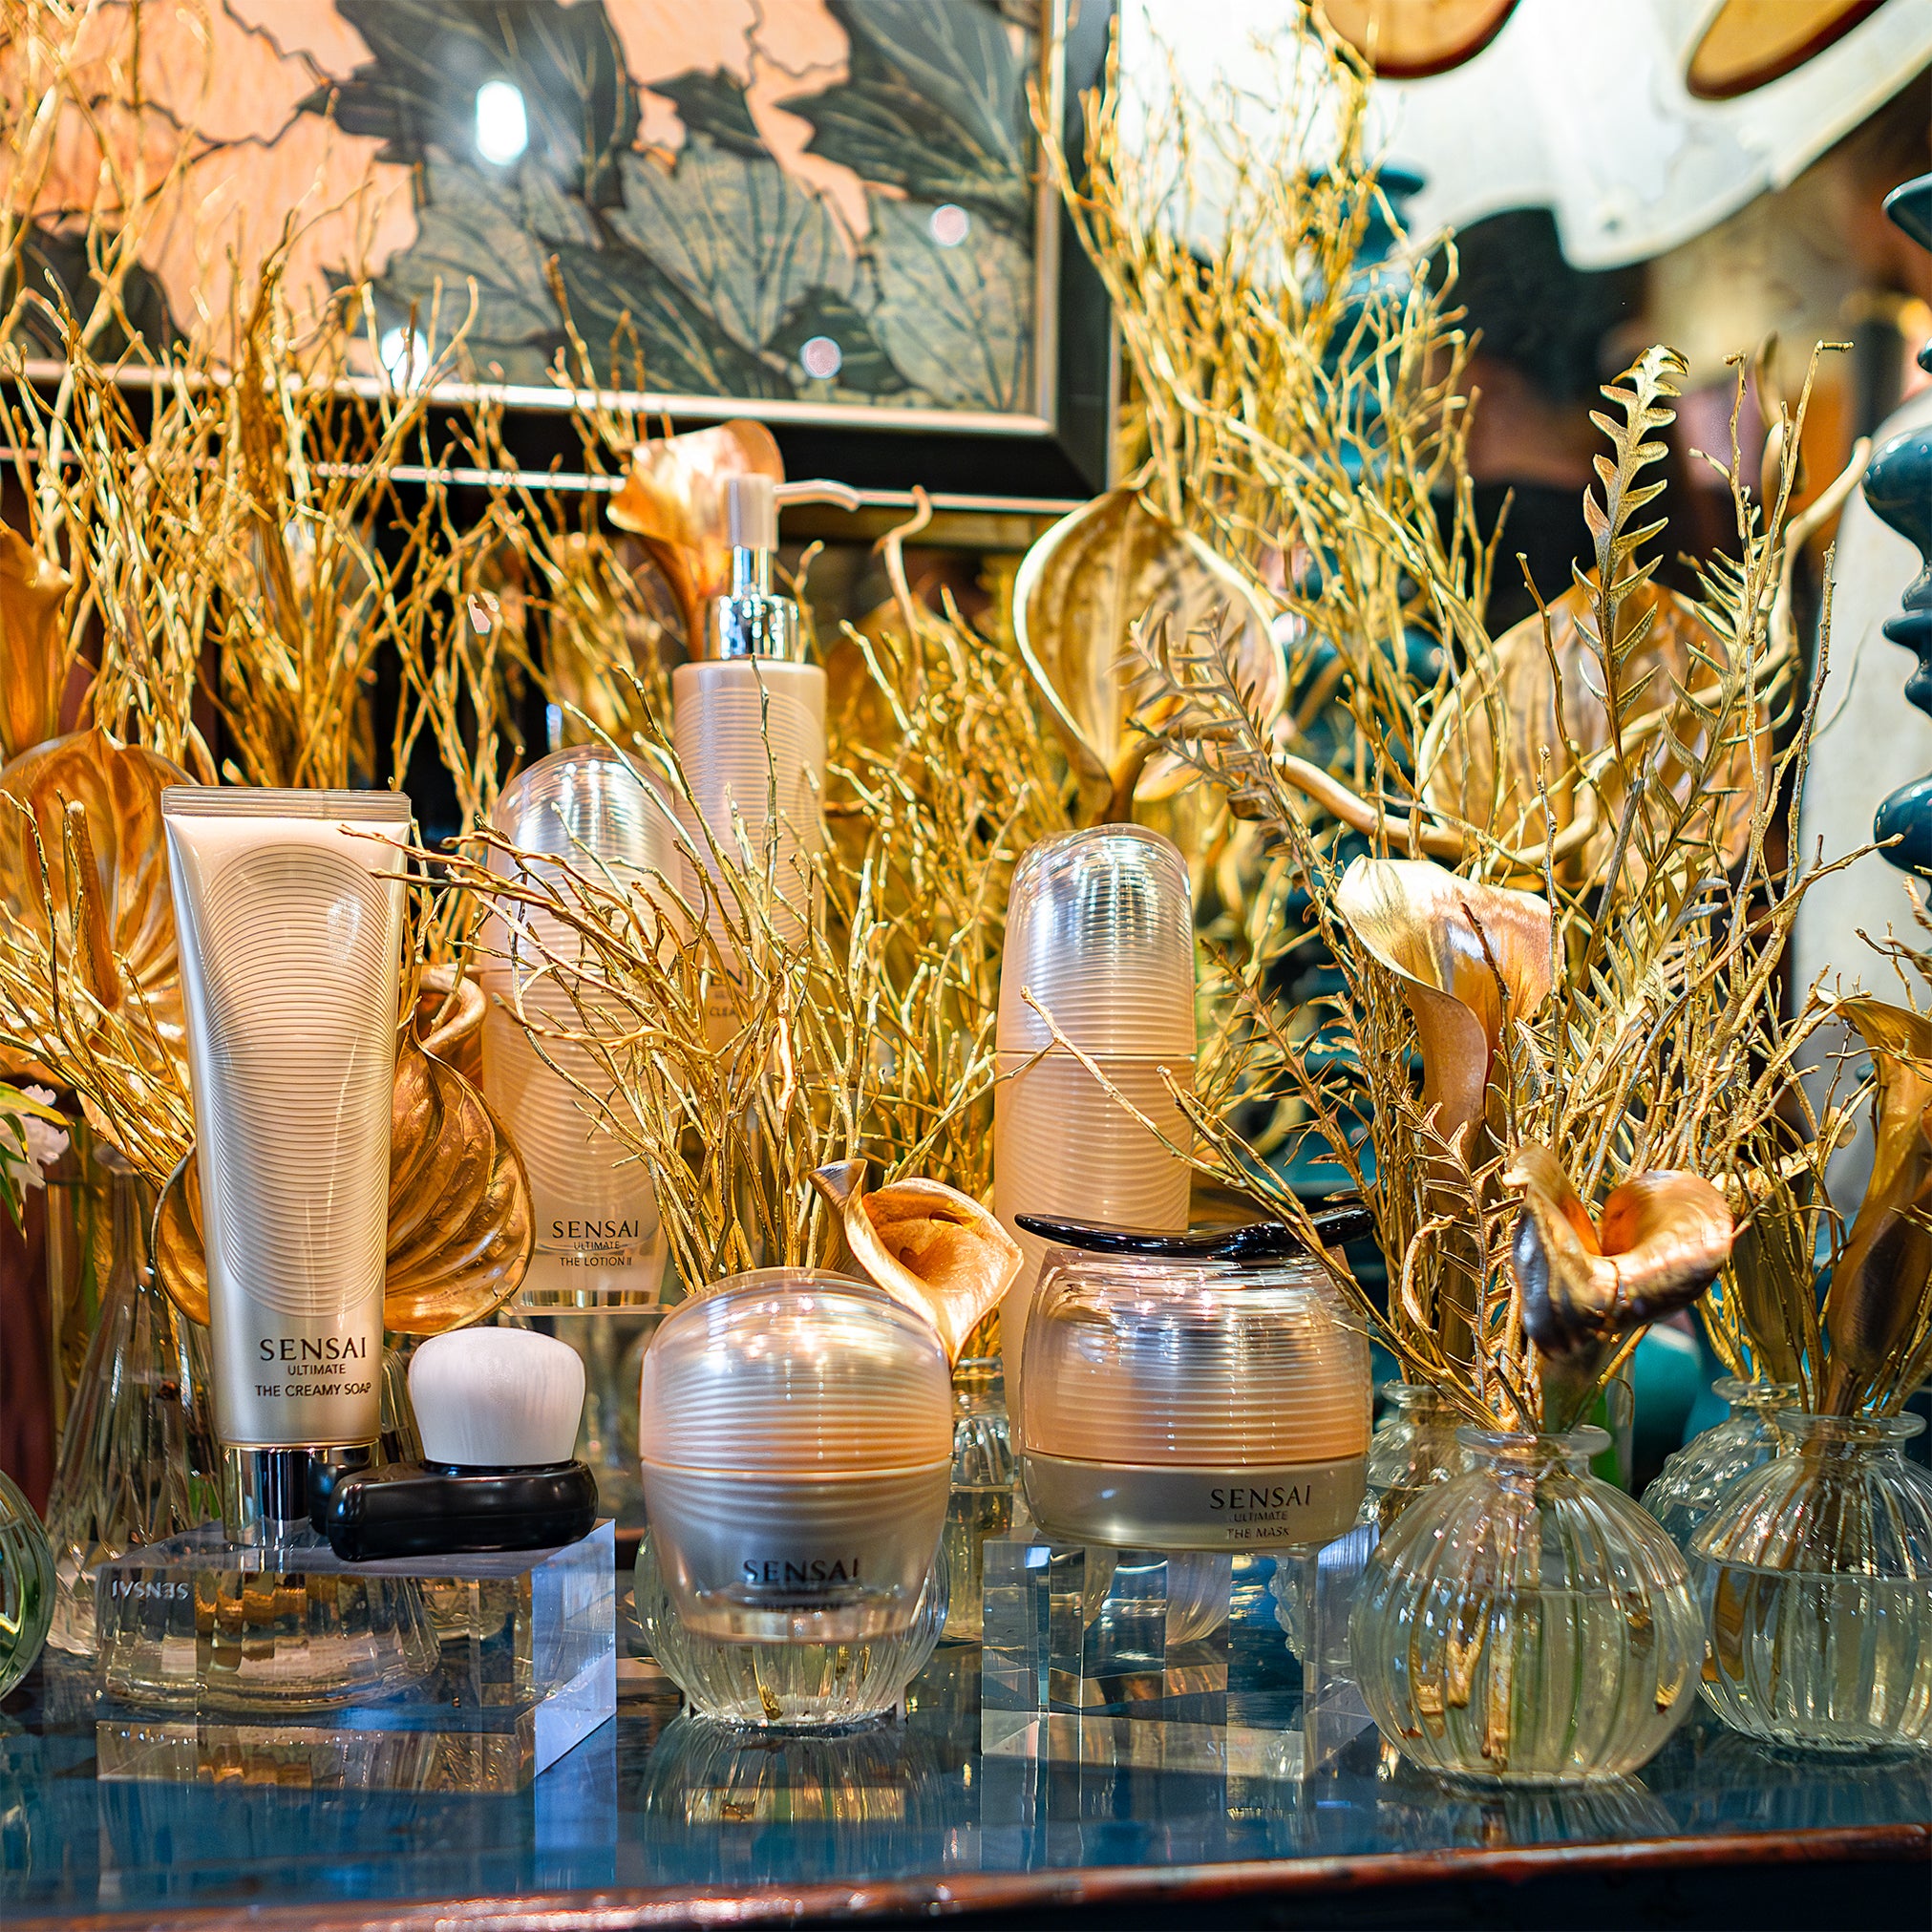 Gold floral arrangements by Amarante London, highlight the sophistication and luxury of Sensai skincare products elegantly displayed during the product launch event in London at Beaverbrook Town House.